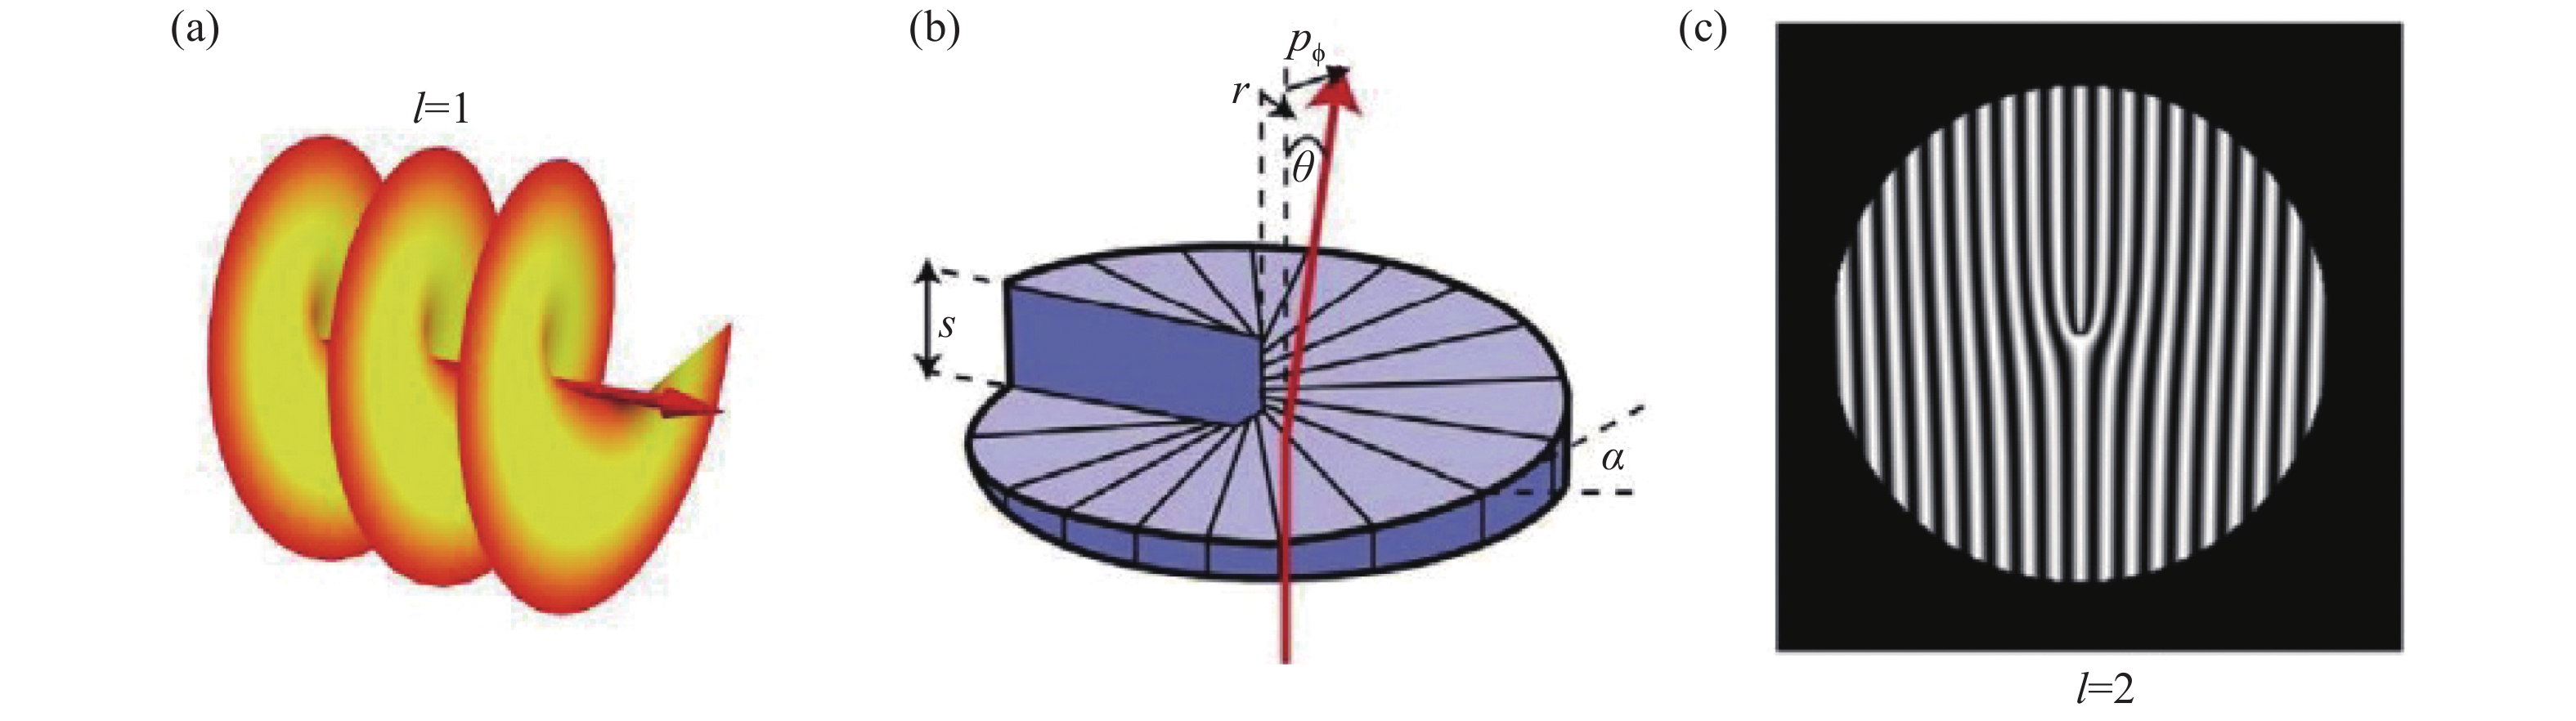 (a) Spiral phase of optical vortices; (b) A spiral phase plate; (c) A fork-shaped diffraction grating